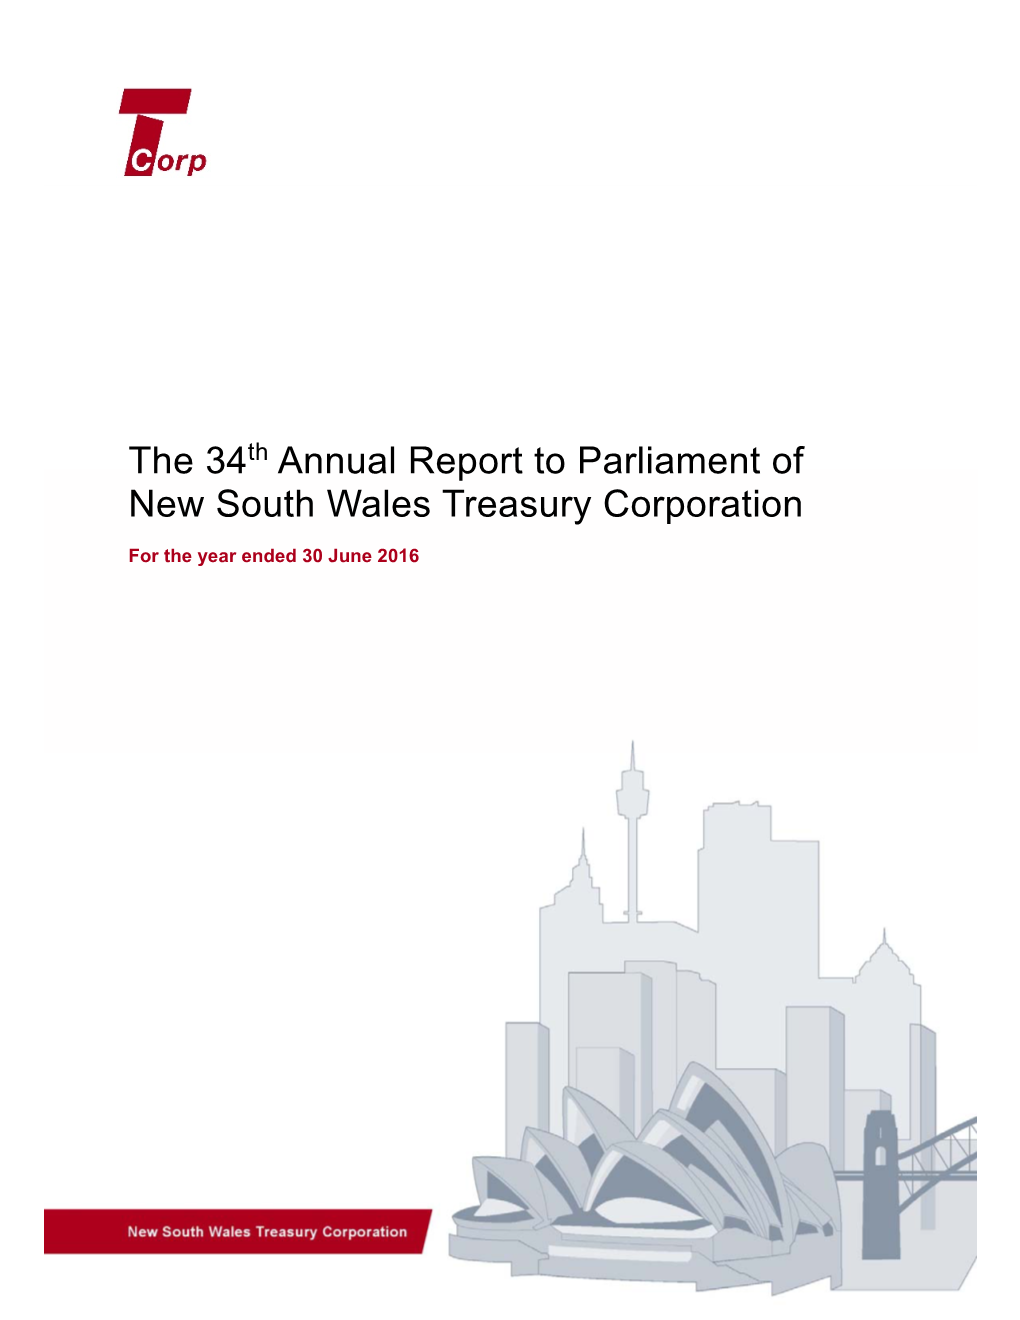 The 34Th Annual Report to Parliament of New South Wales Treasury Corporation